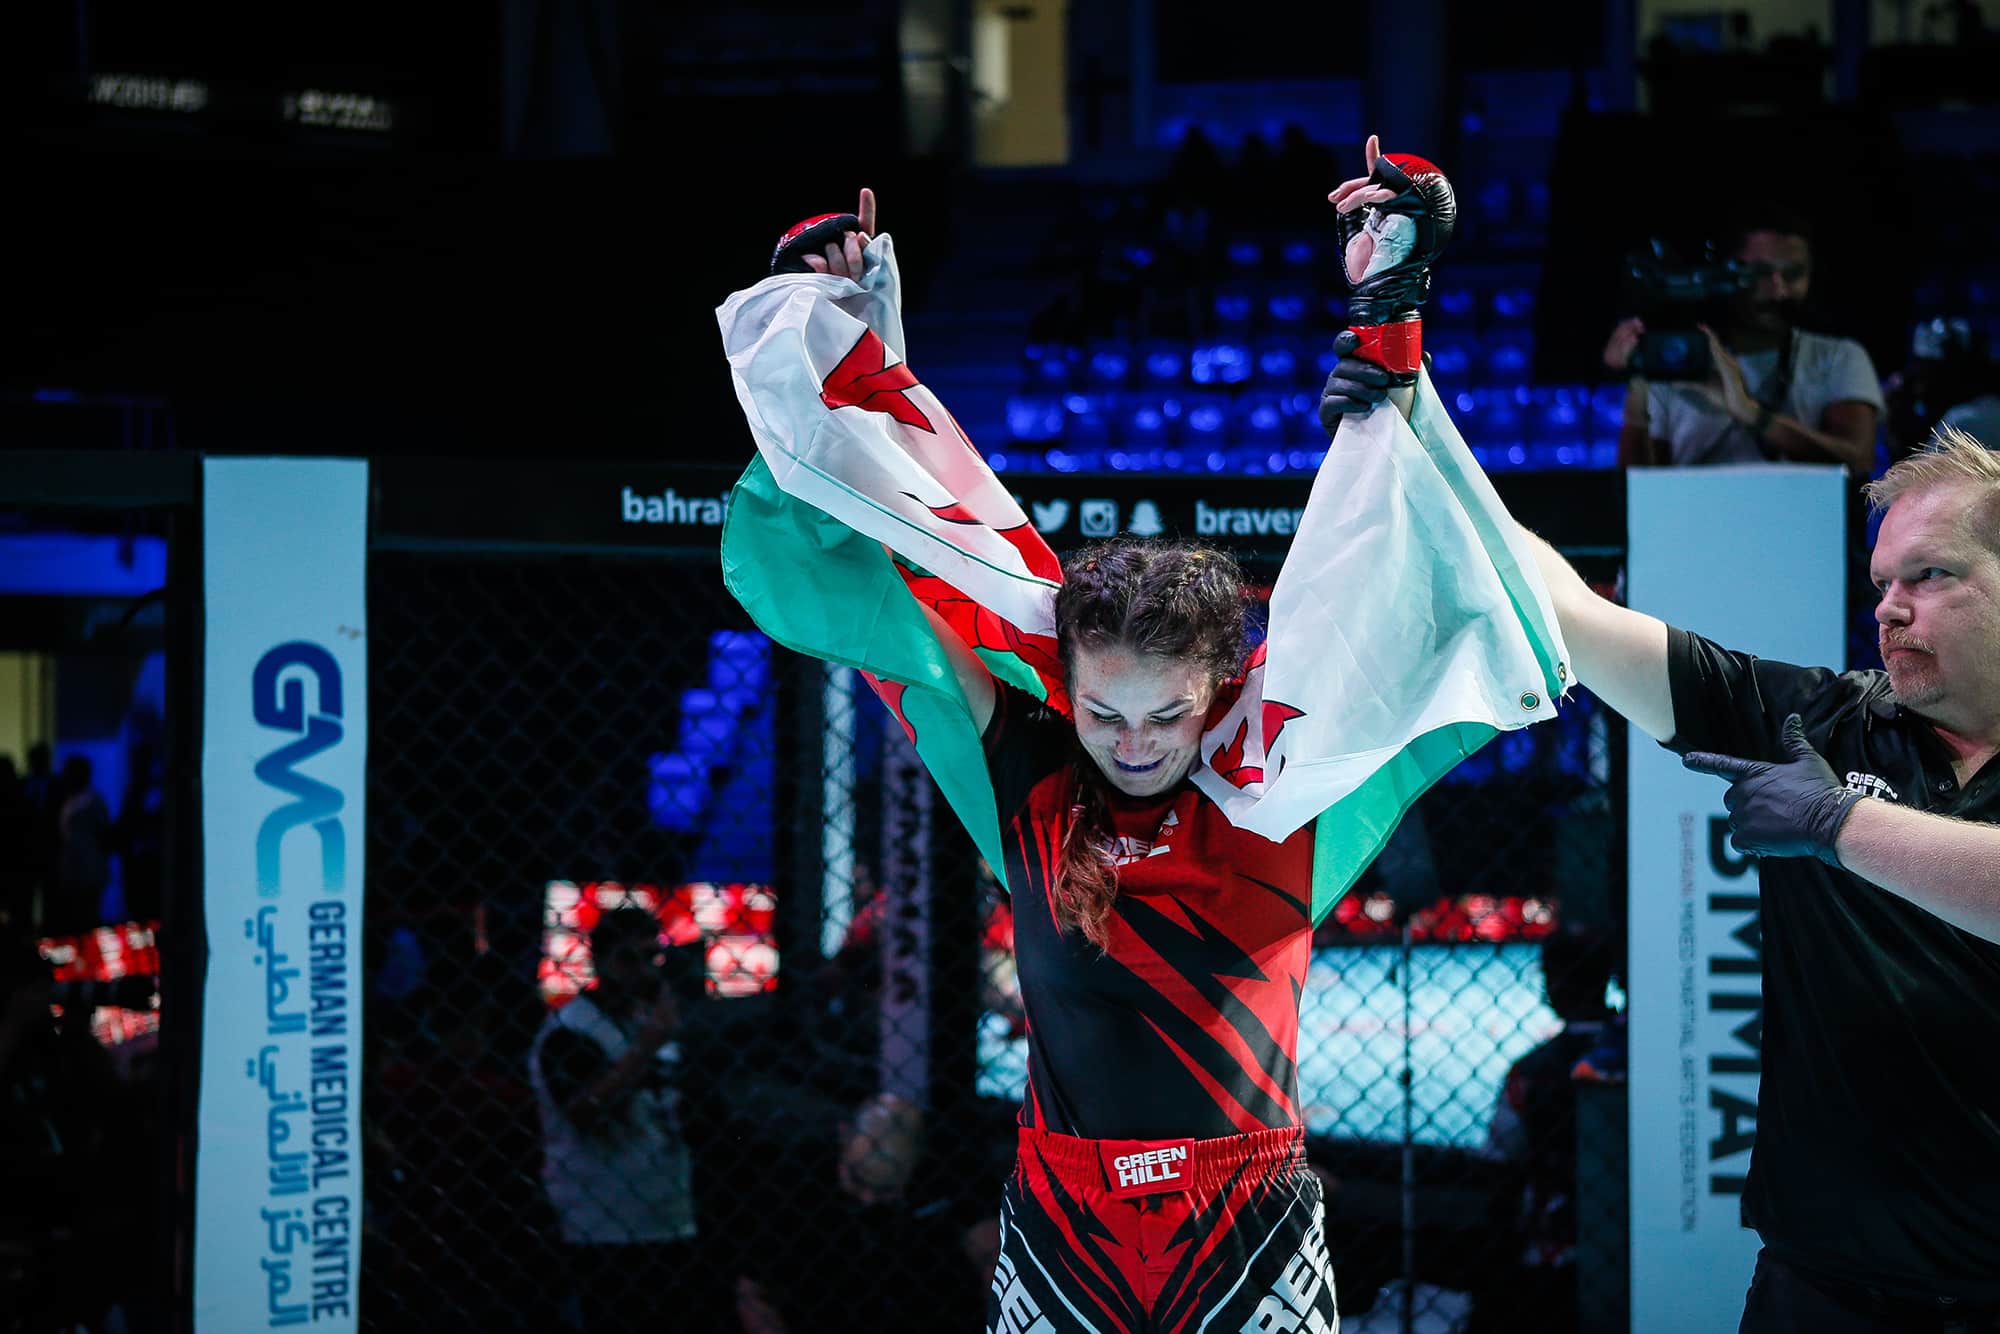 Best performance nominees announced for 2020 IMMAF Amateur MMA Awards